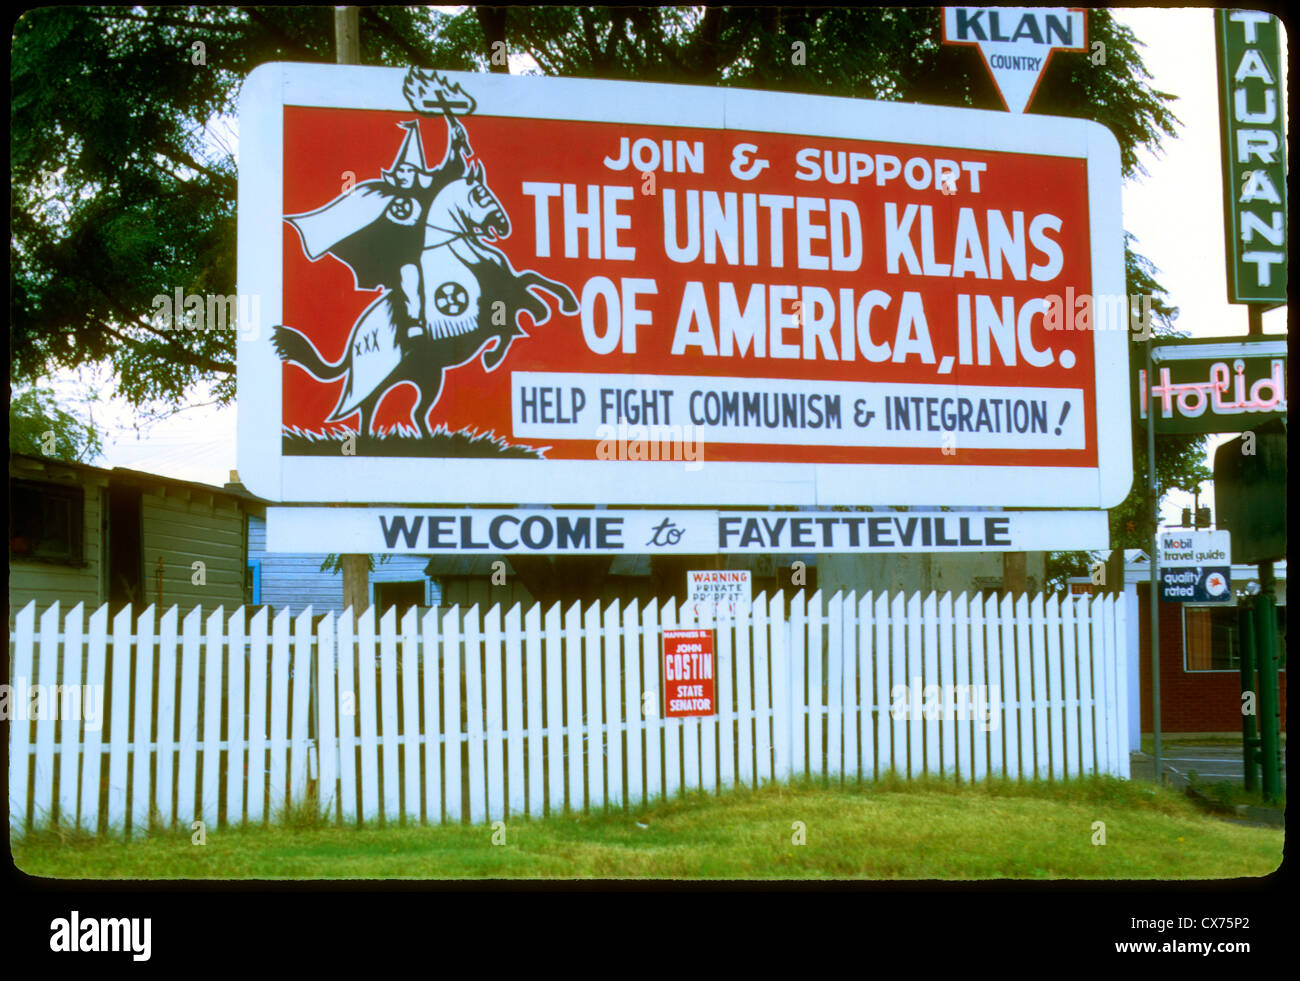 A billboard in Fayetteville, North Caroline promotes membership in the KKK during the early 1960s. Ku Klux Klan sign Fayetteville North Carolina racism racist 1960s American South right wing politics billboard sign KKK Stock Photo